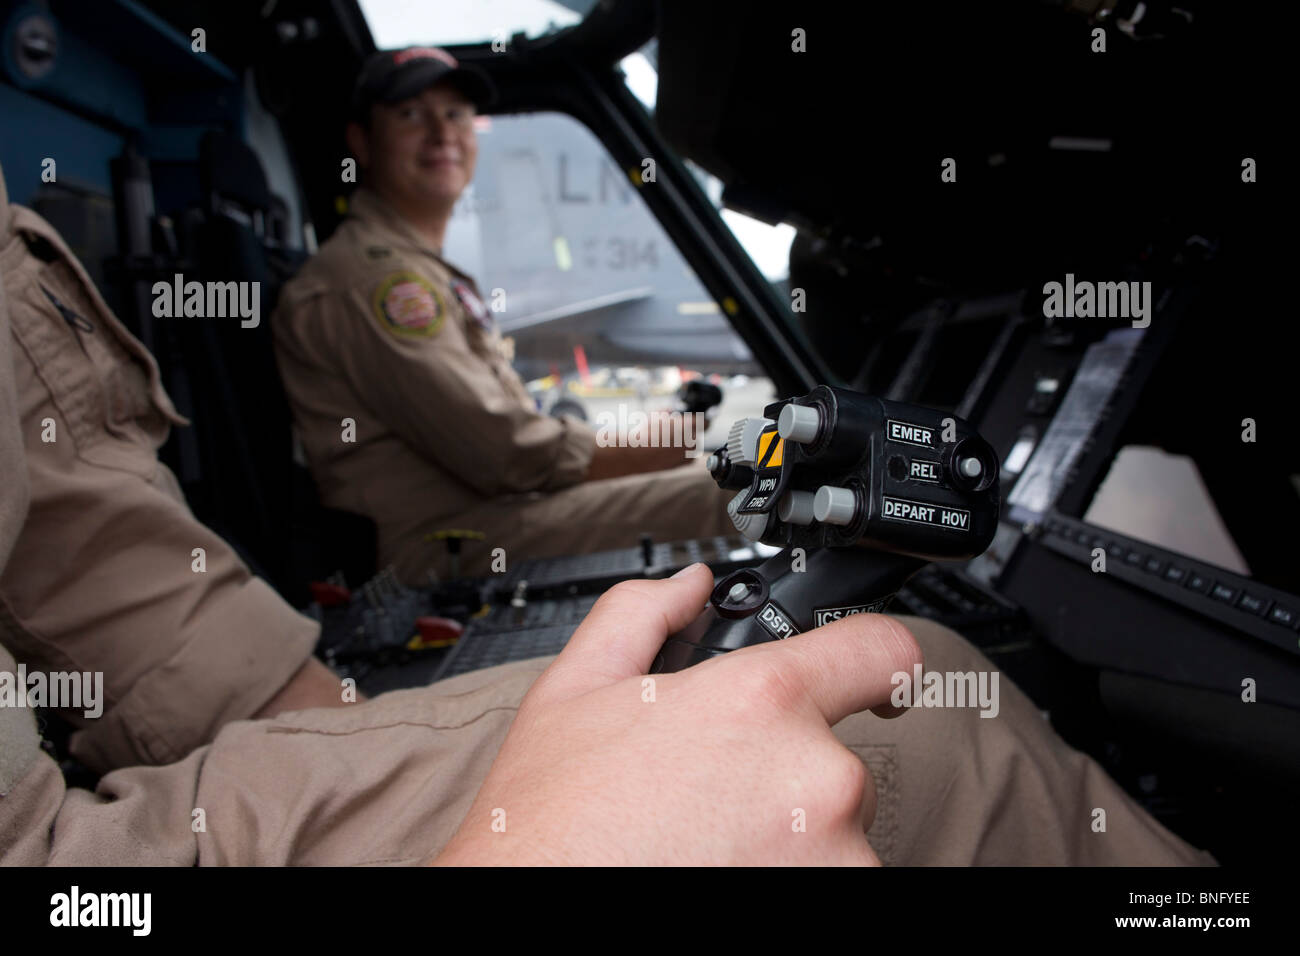 US Navy pilot grasps cyclic stick in the cockpit of a Sikorsky MH-60R helicopter at the Farnborough Airshow. Stock Photo